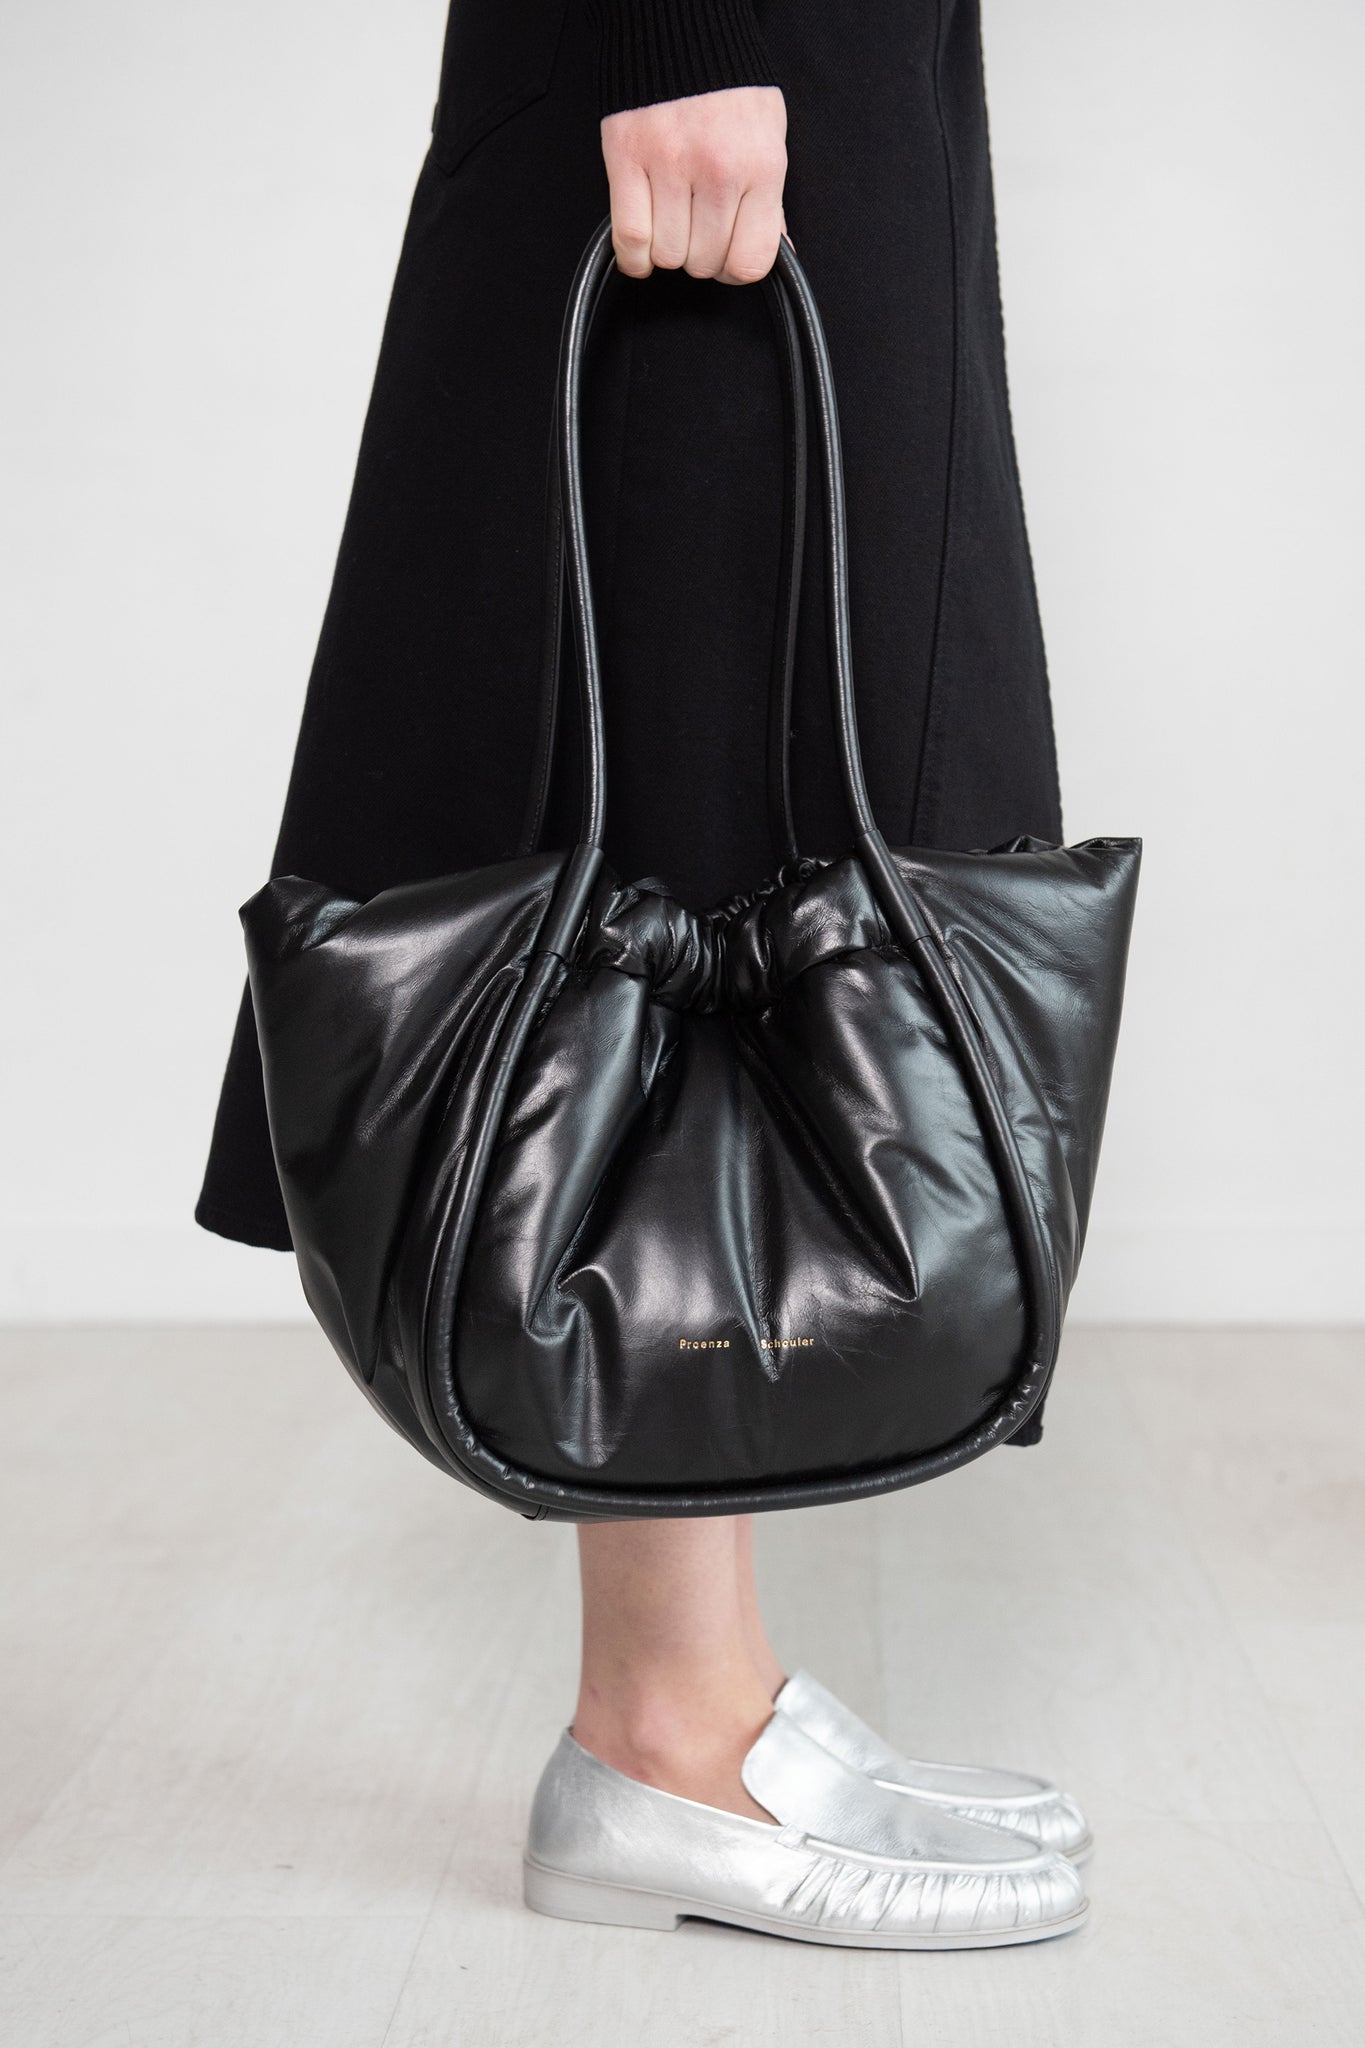 Proenza Schouler White Label - Puffy Nappa Large Ruched Tote, Black